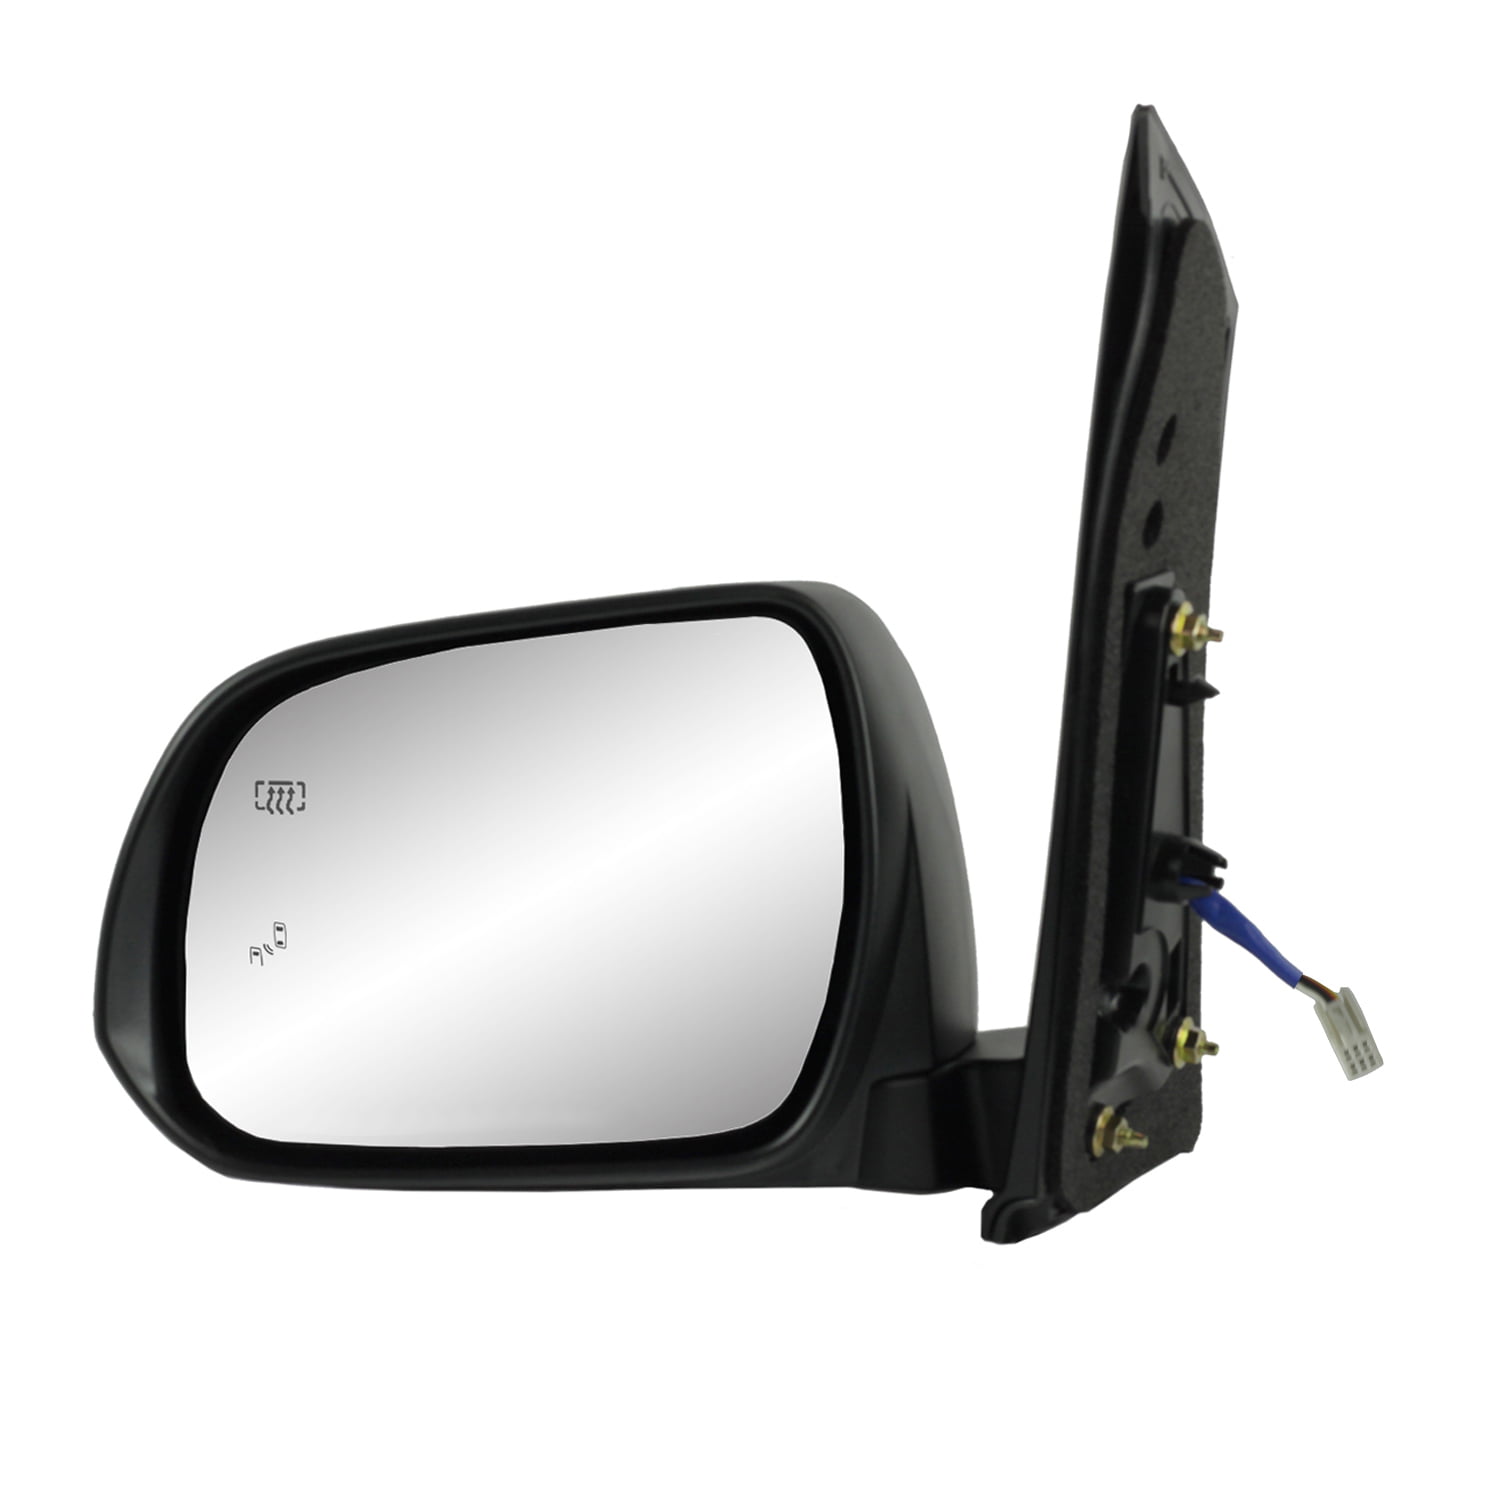 70206T Heated Power Foldaway Textured Black w/PTM Cover w/o Memory w/Blind spot Detection System Fit System Driver Side Mirror for Toyota Sienna 